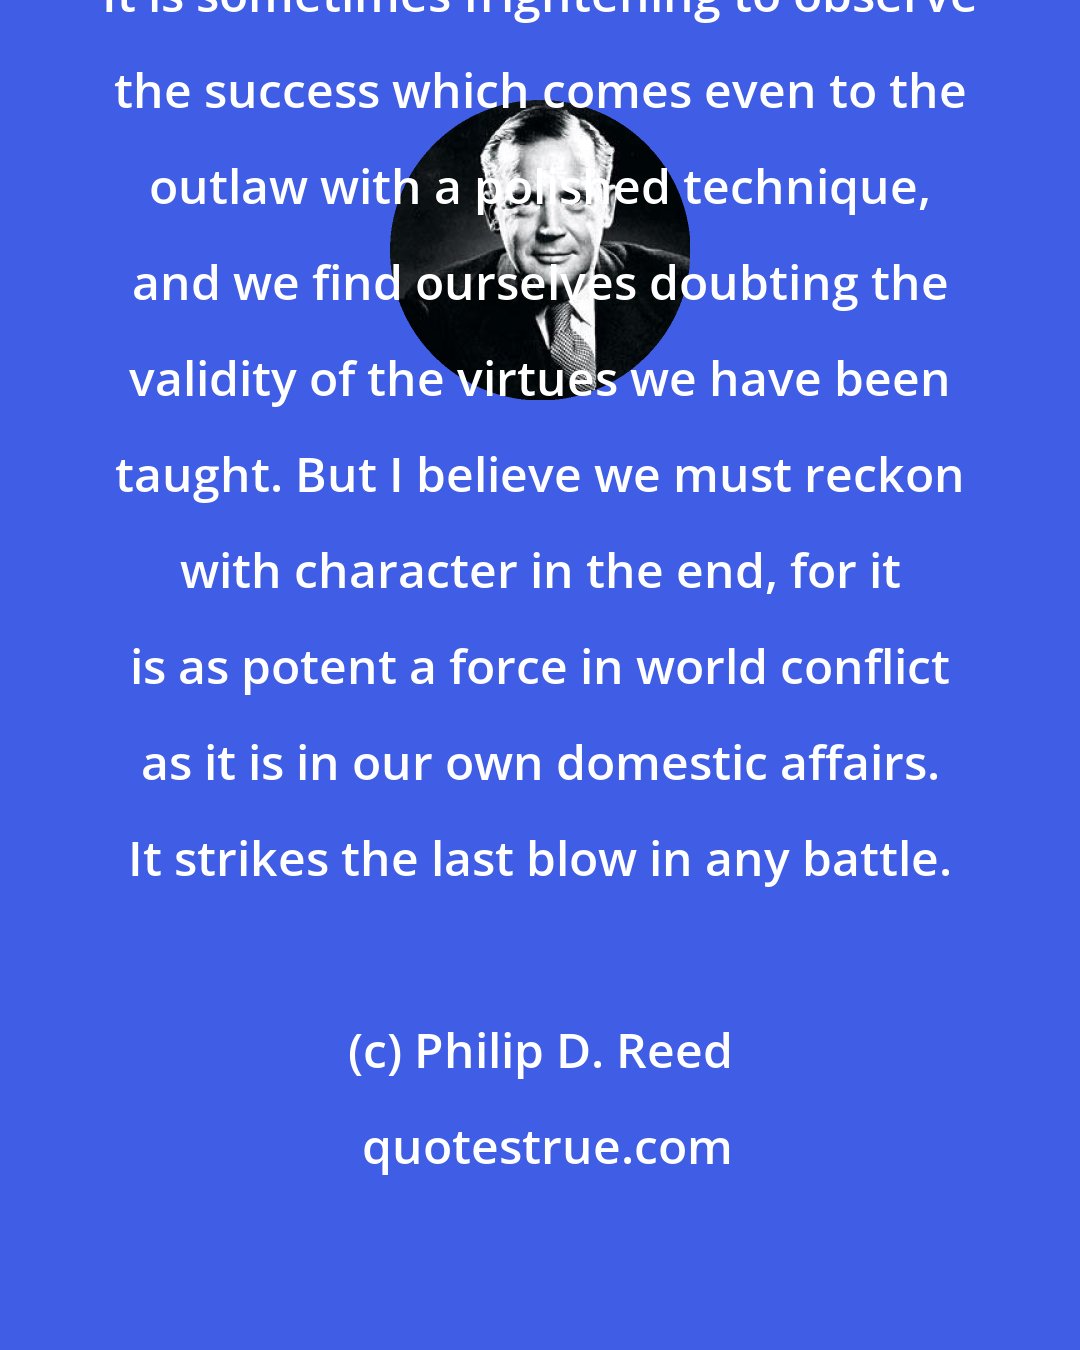 Philip D. Reed: It is sometimes frightening to observe the success which comes even to the outlaw with a polished technique, and we find ourselves doubting the validity of the virtues we have been taught. But I believe we must reckon with character in the end, for it is as potent a force in world conflict as it is in our own domestic affairs. It strikes the last blow in any battle.